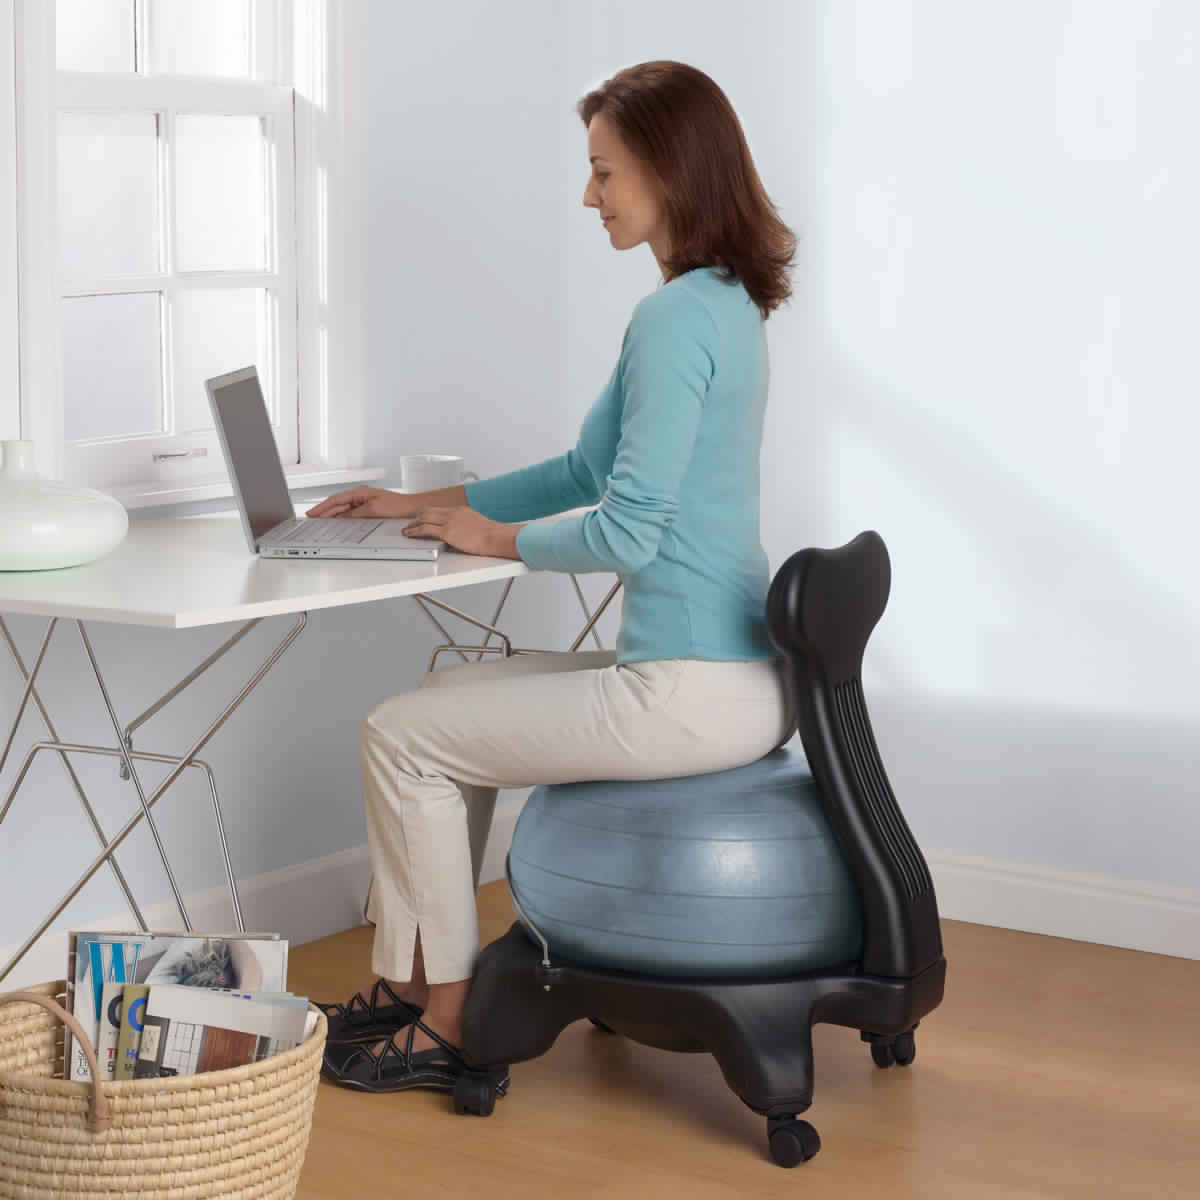 Balance Ball Chair Yoga Benefits of using Yoga Ball Chair for your Home or Office - 6